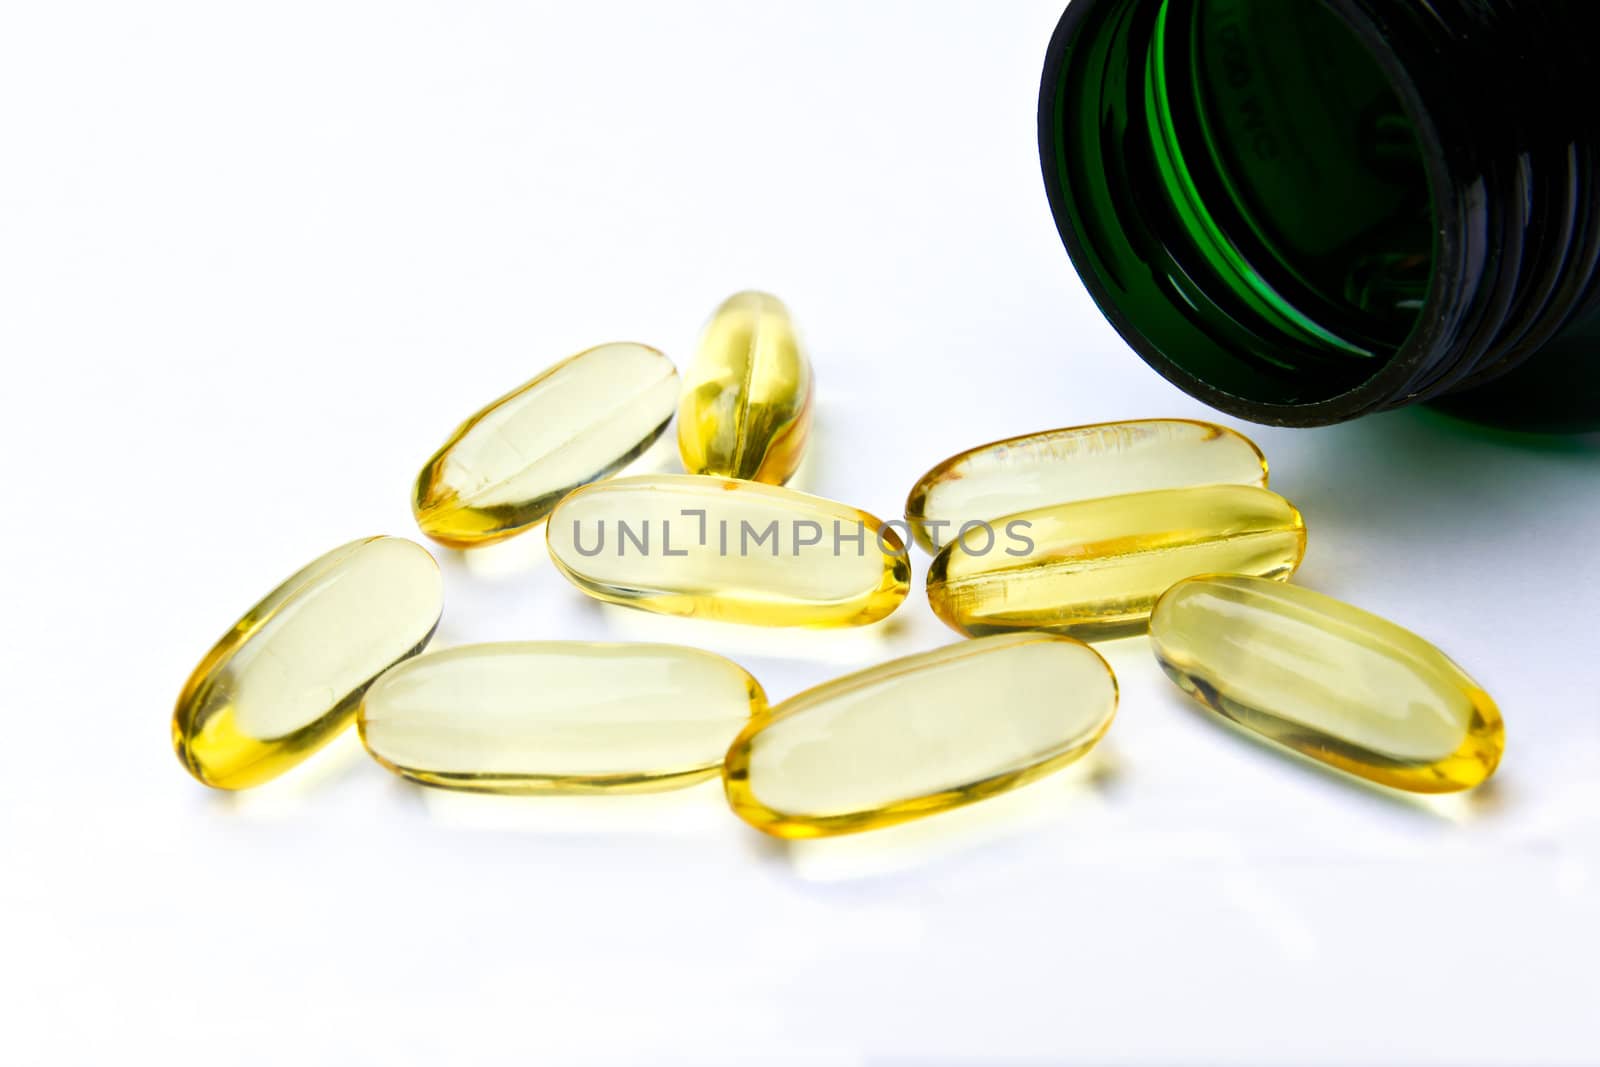 fish oil capsule by tungphoto